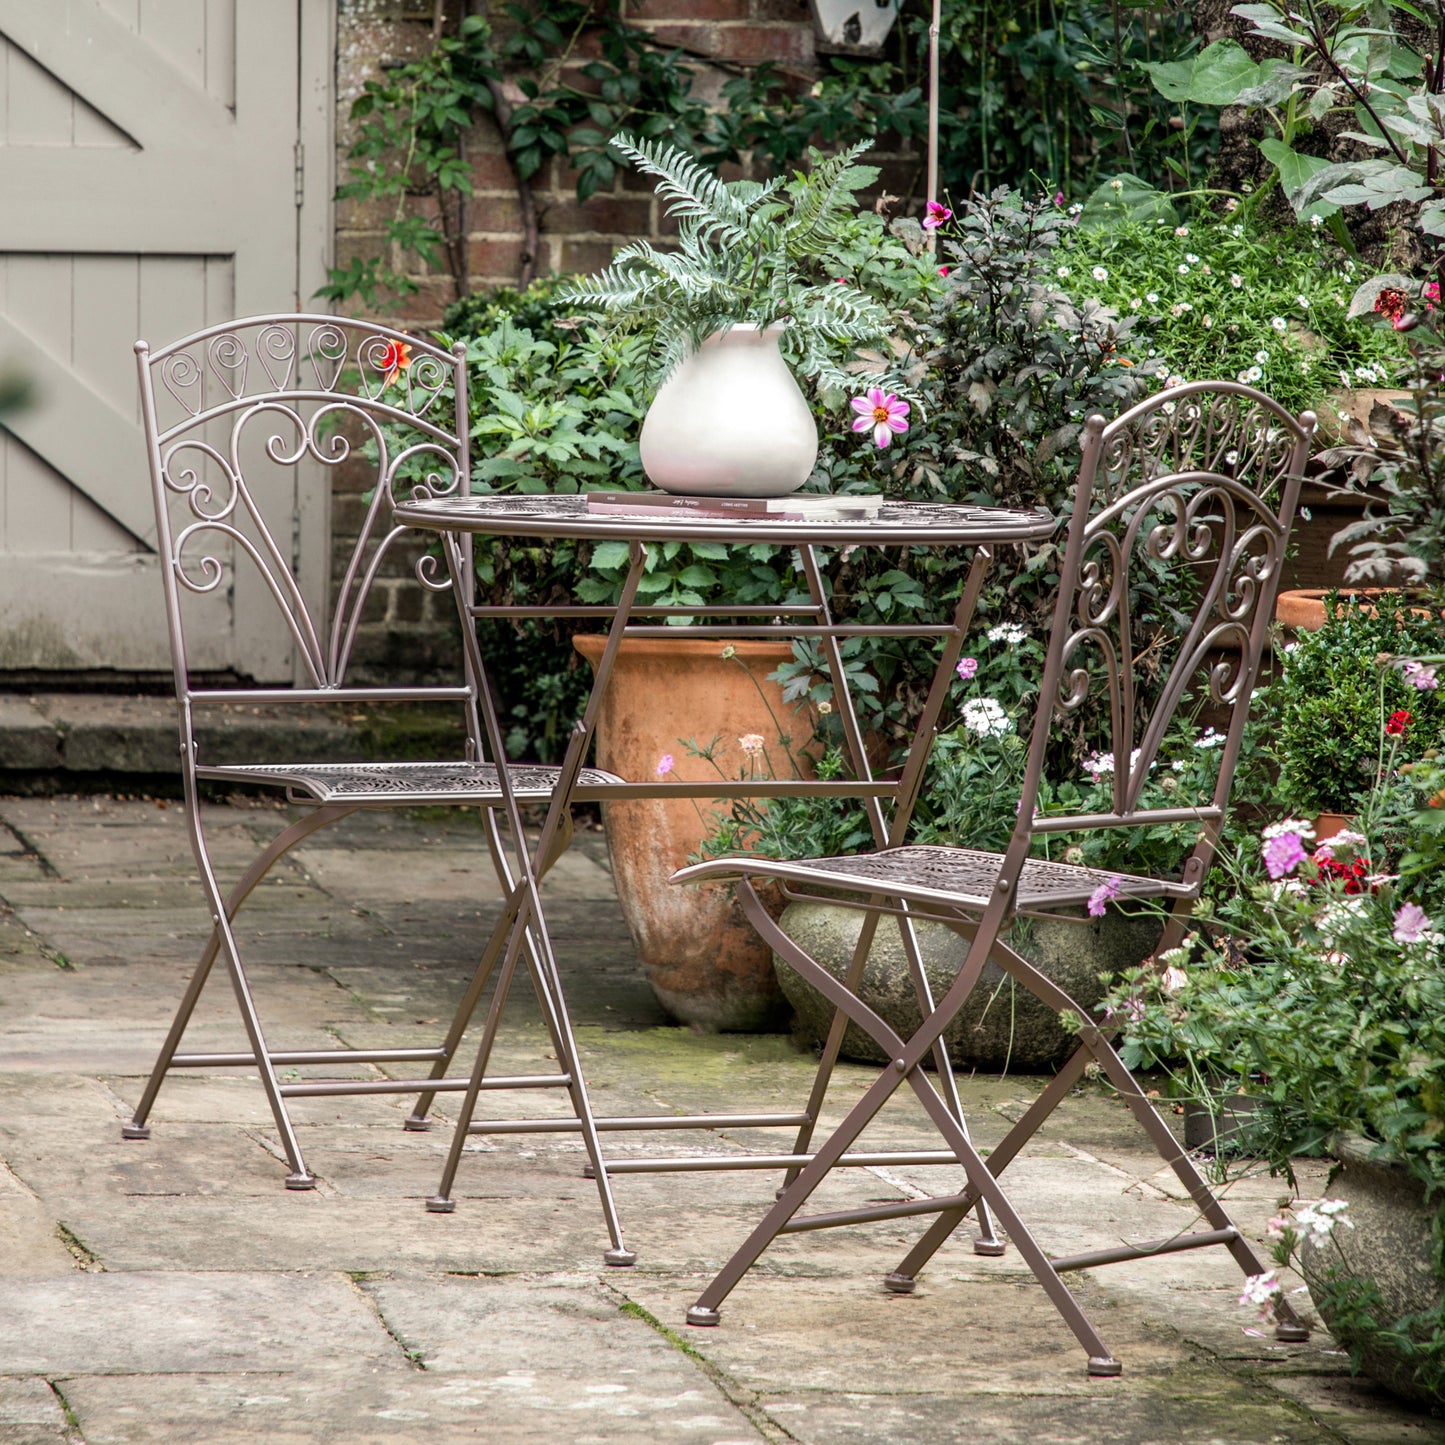 A Roborough 2 Seater Bistro Set Noir by Kikiathome.co.uk, perfect for home furniture and interior decor in a garden.